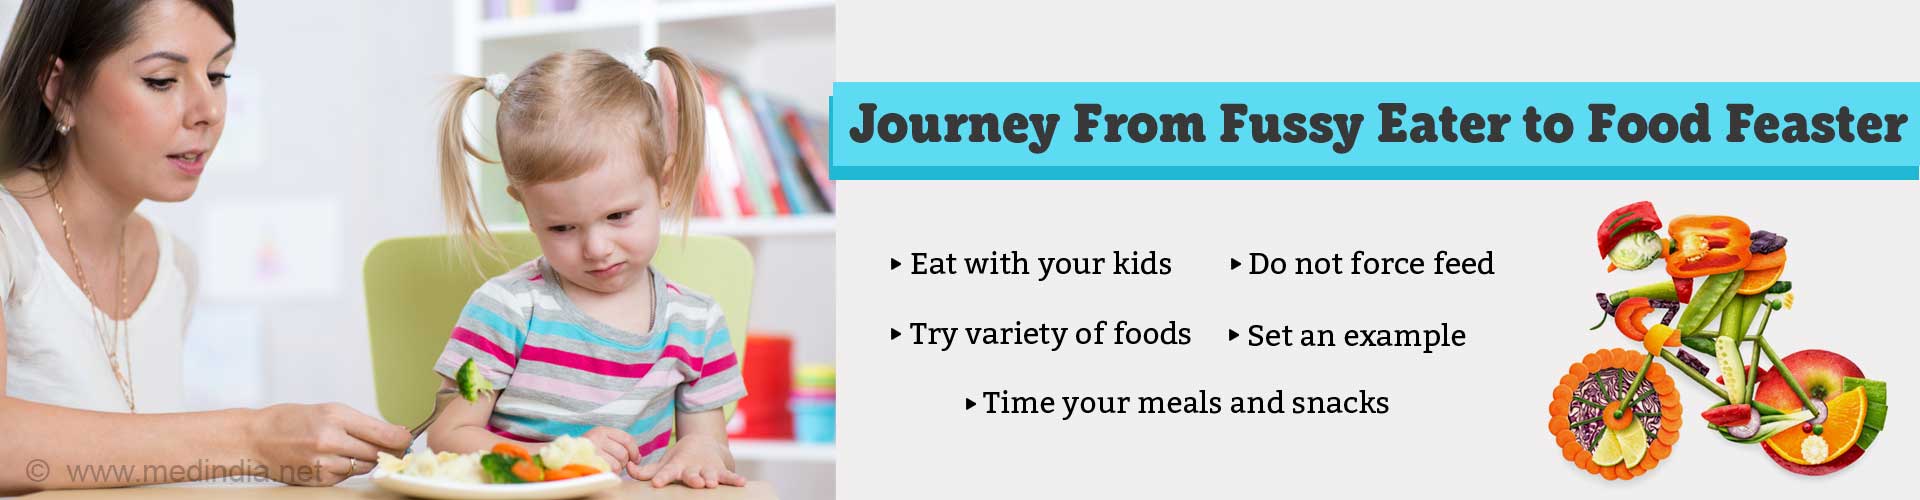 Journey from fussy eater to food feaster. Eat with your kids. Do not force feed. Try variety of foods. Set an example. Time your meals and snacks.